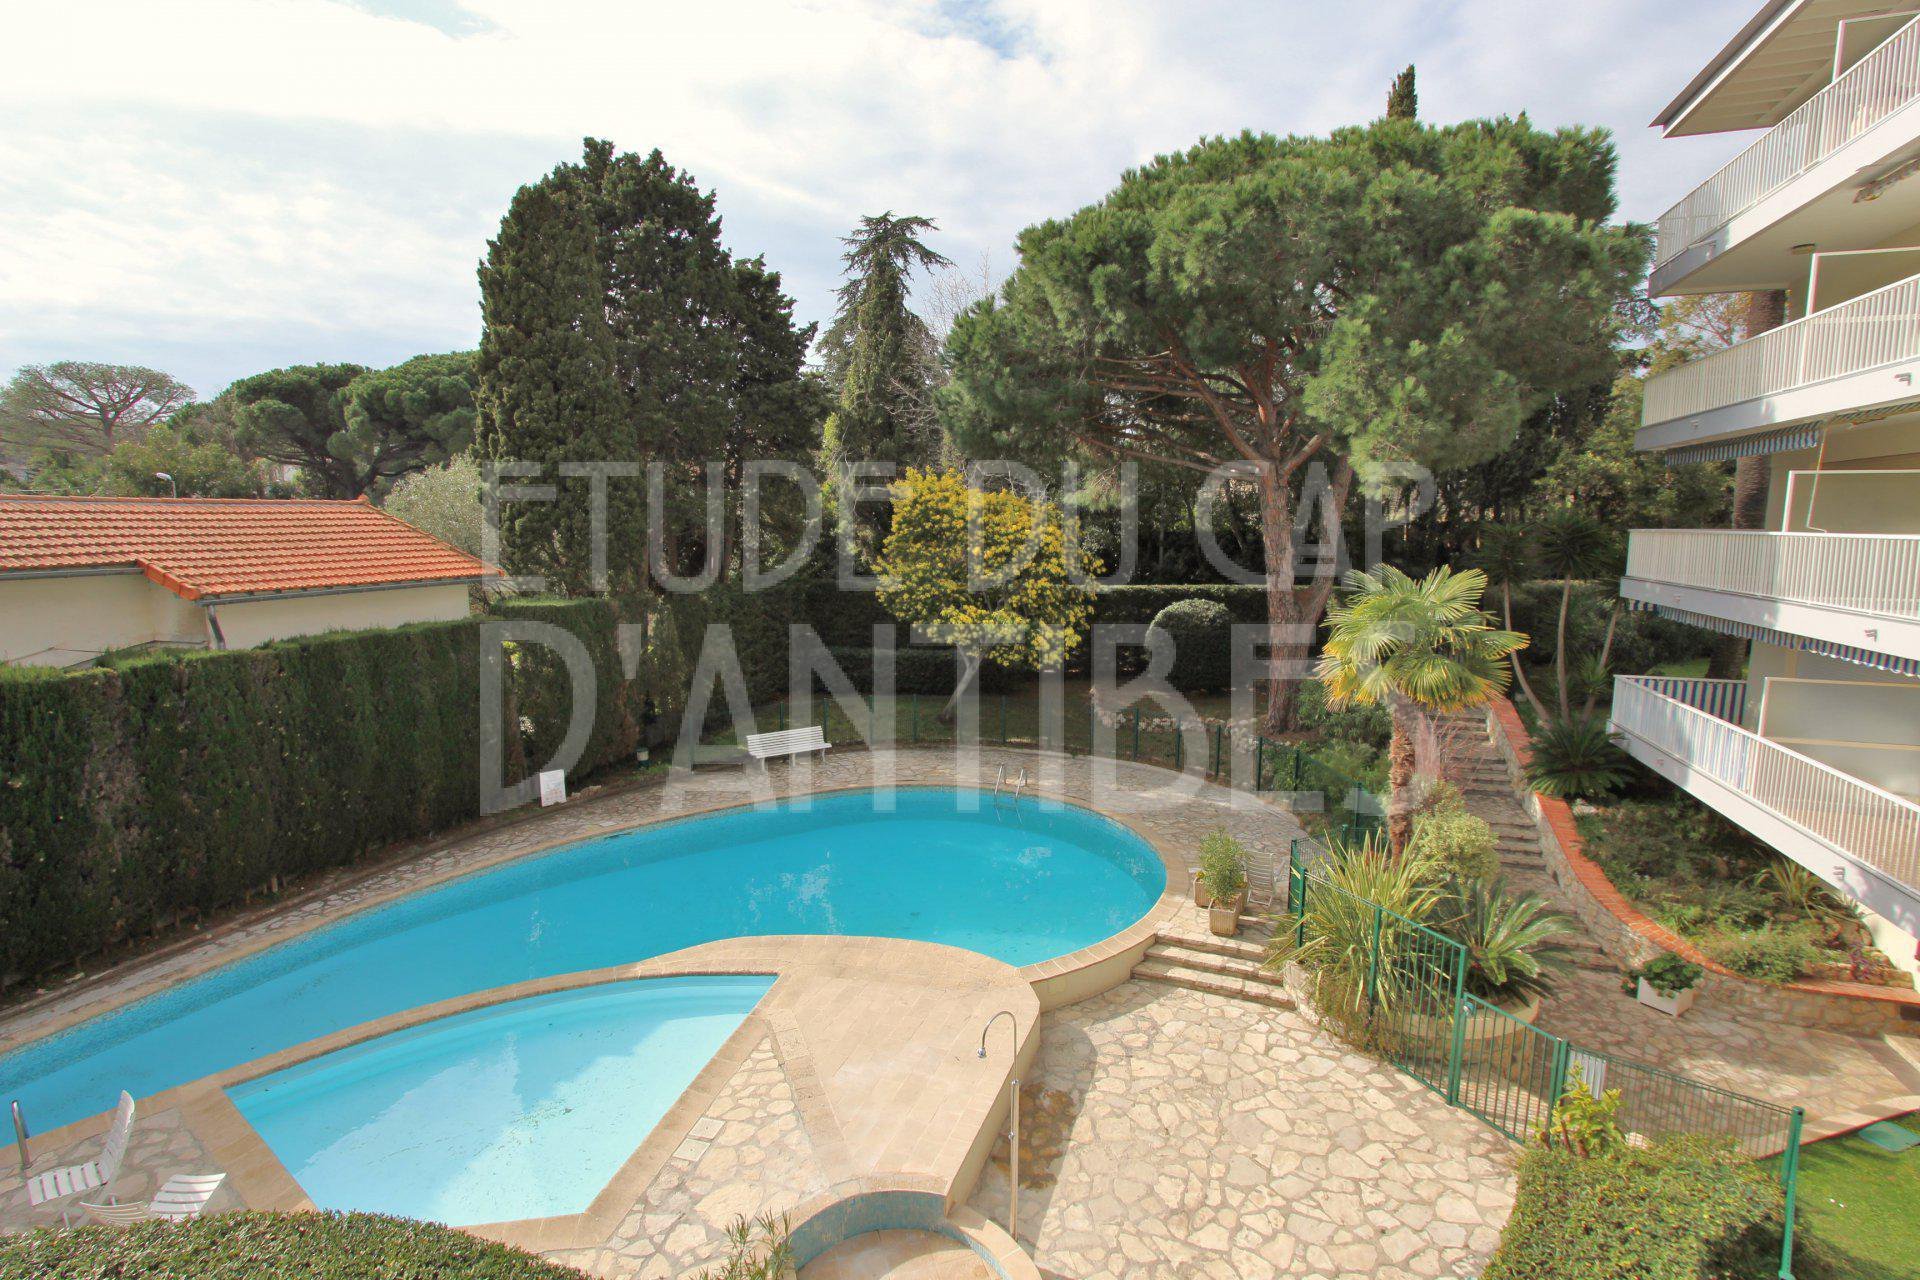 Cap d'Antibes - Walking distance to the beach - Beautiful 3 bedroom apartment